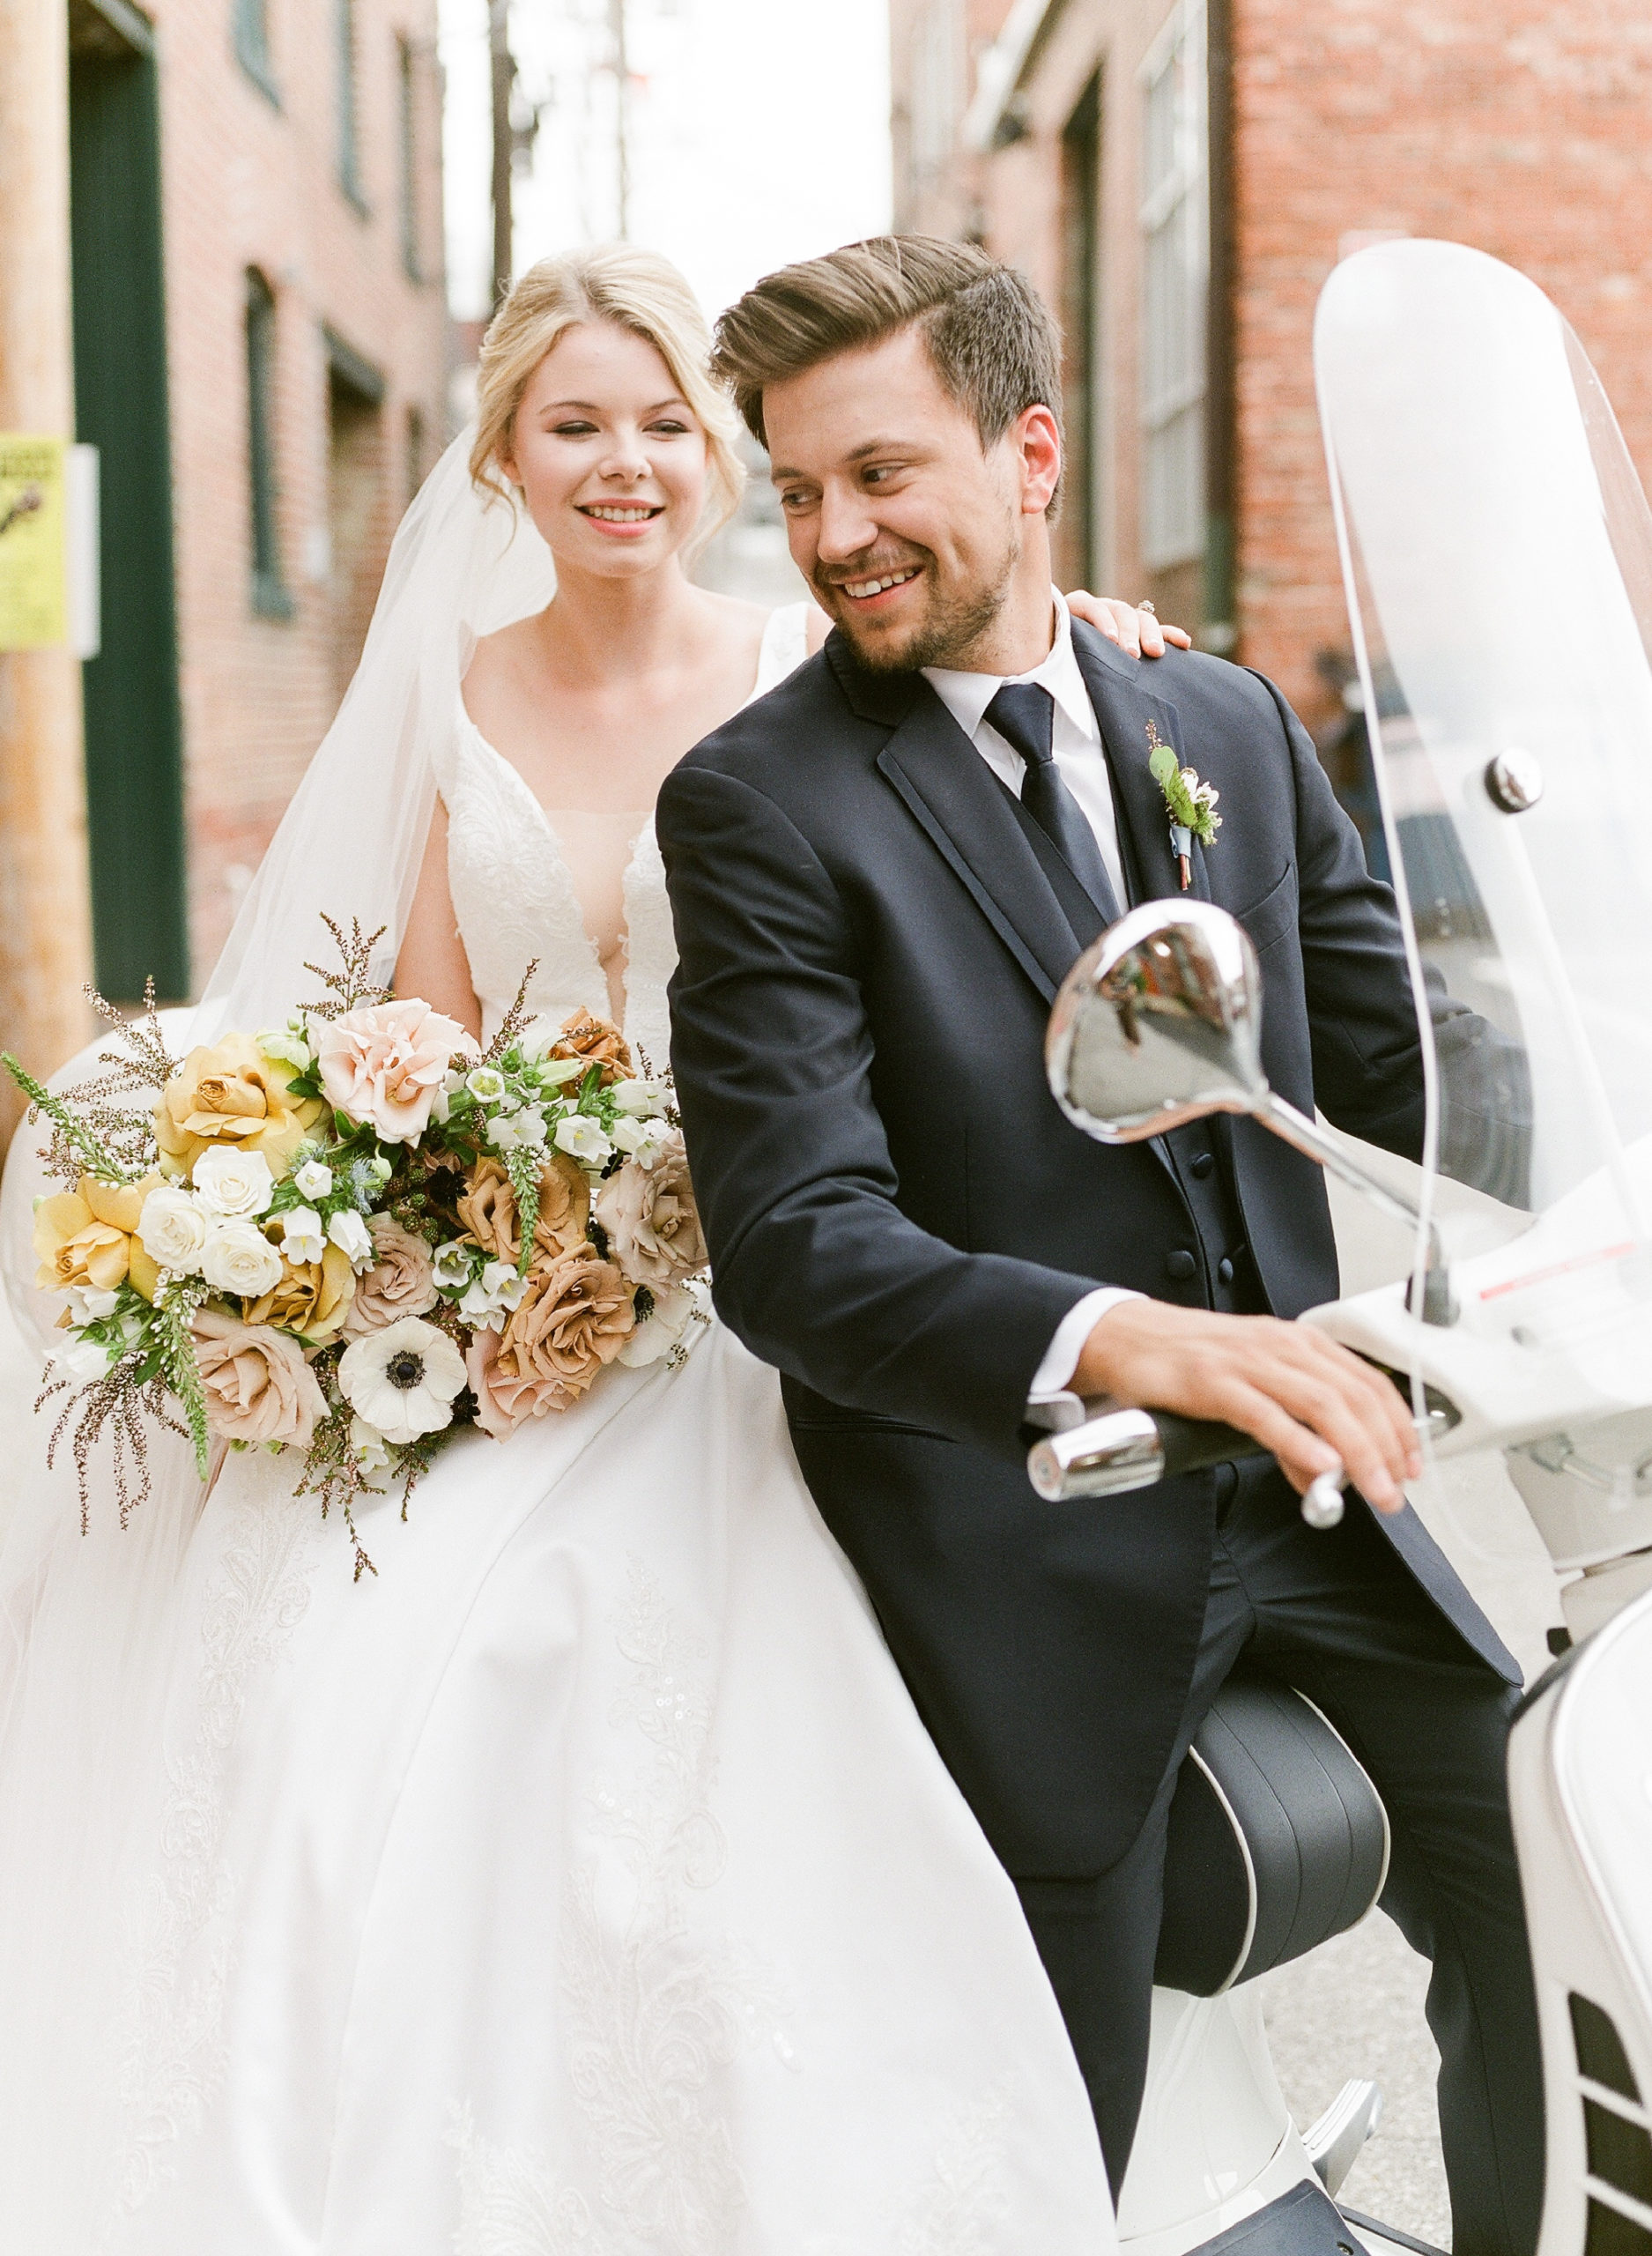 Bride-and-Groom-Vespa-Exit-|-The-Wedding-Experience-|-Planning-and-Stationery-by-Nellie-Sparkman-|-Floral-by-Blue-Bouquet-KC-Wedding-Florist